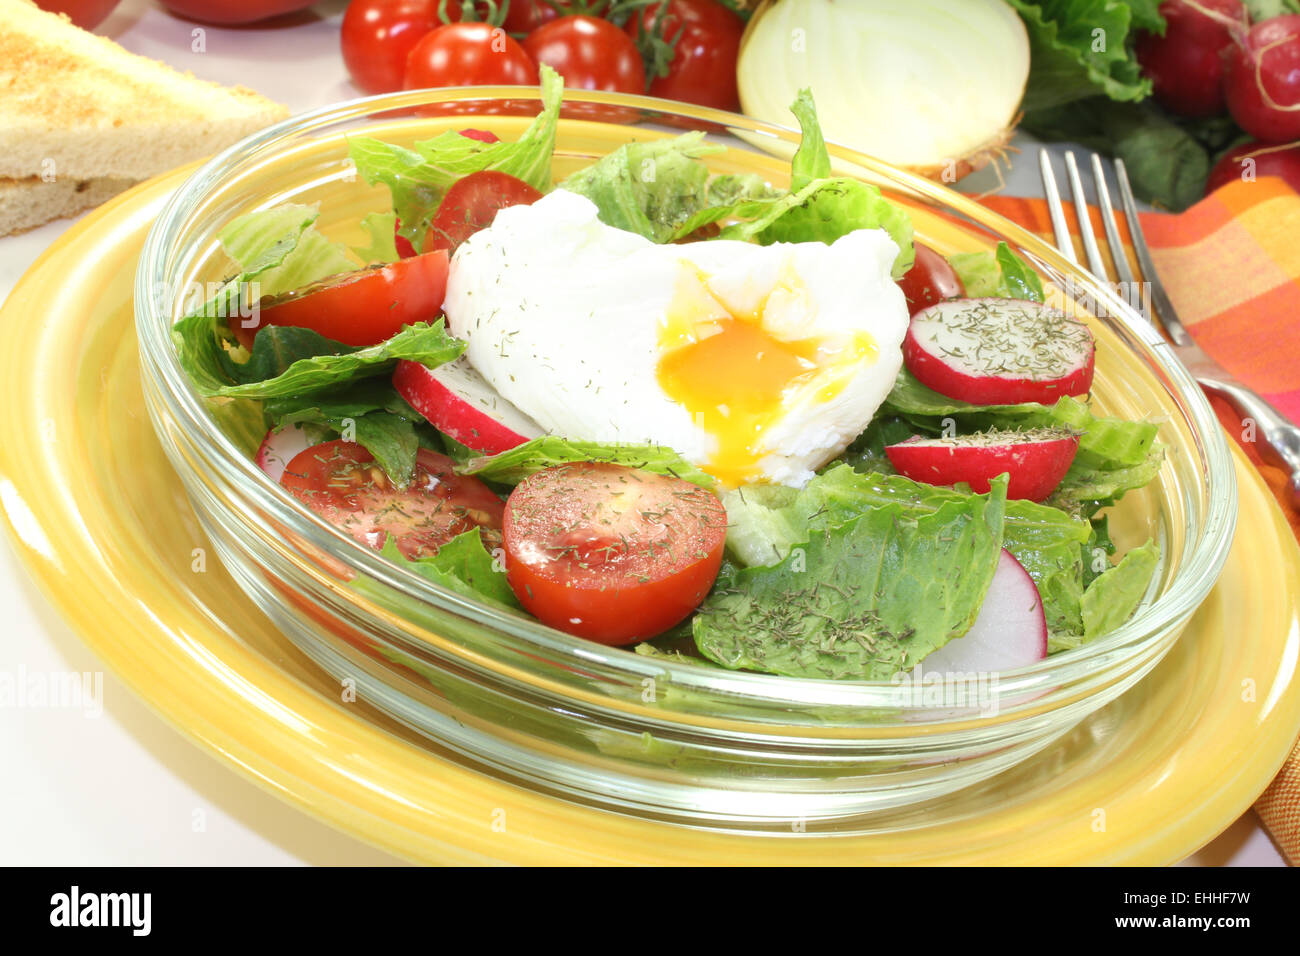 salad with poached egg Stock Photo